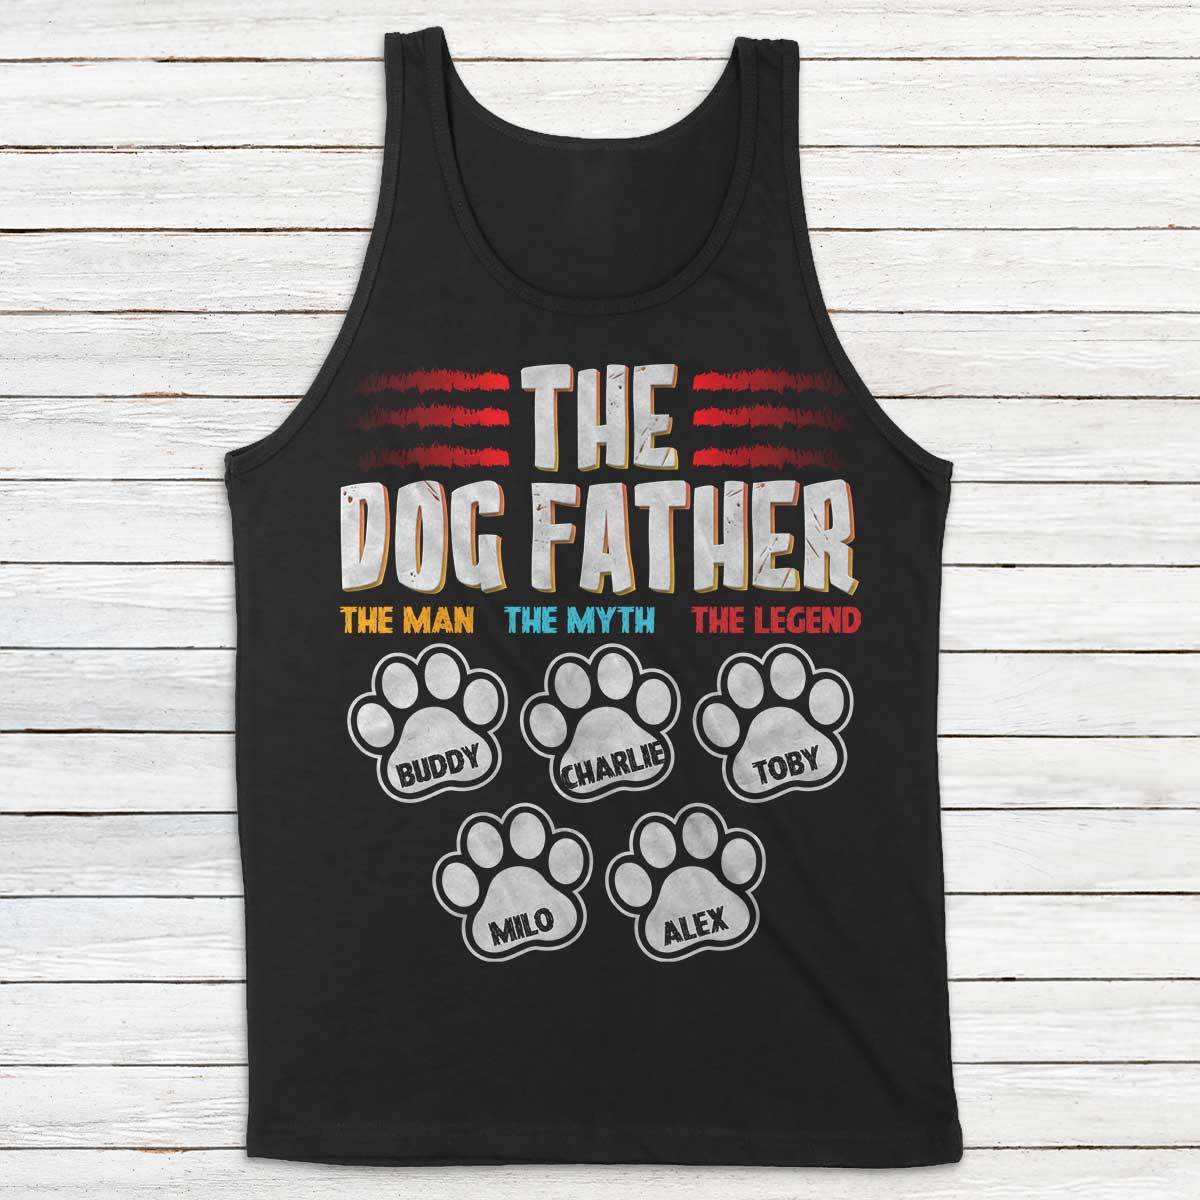 The Dog Father, The Man, The Myth, The Legend Personalized Shirt